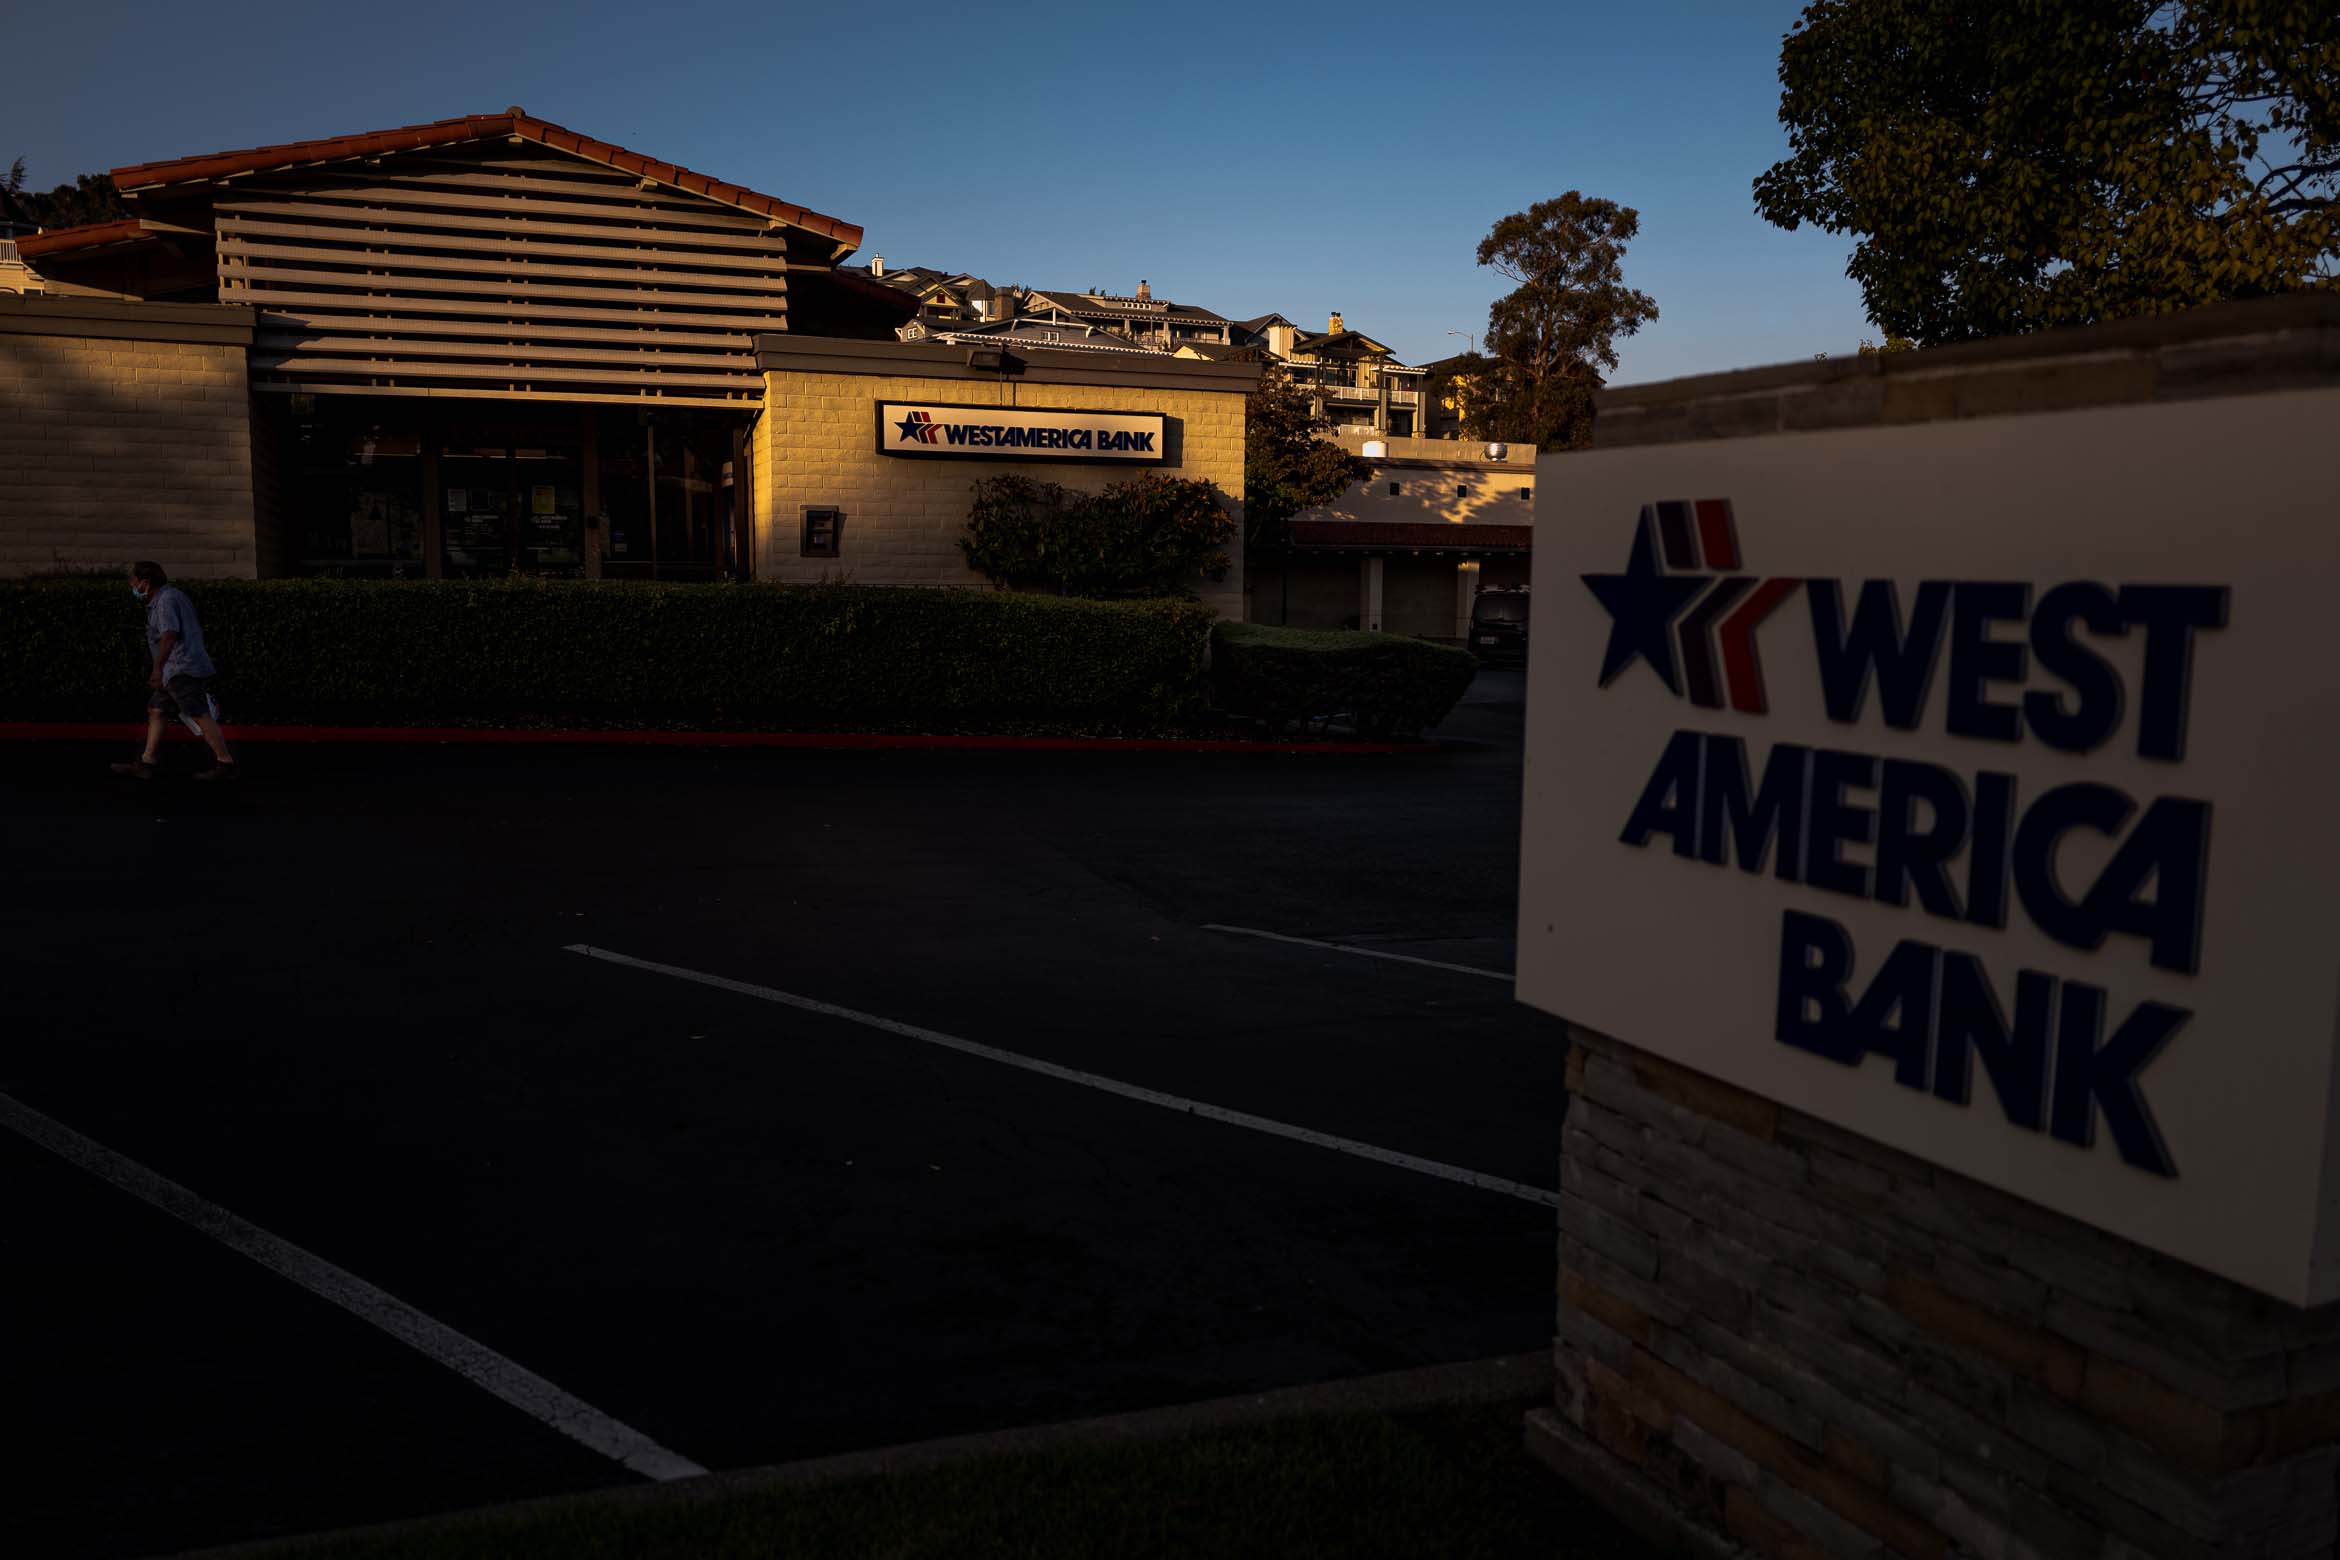 Joanna Collum sought help from employees of the Westamerica Bank branch in Benicia, California.